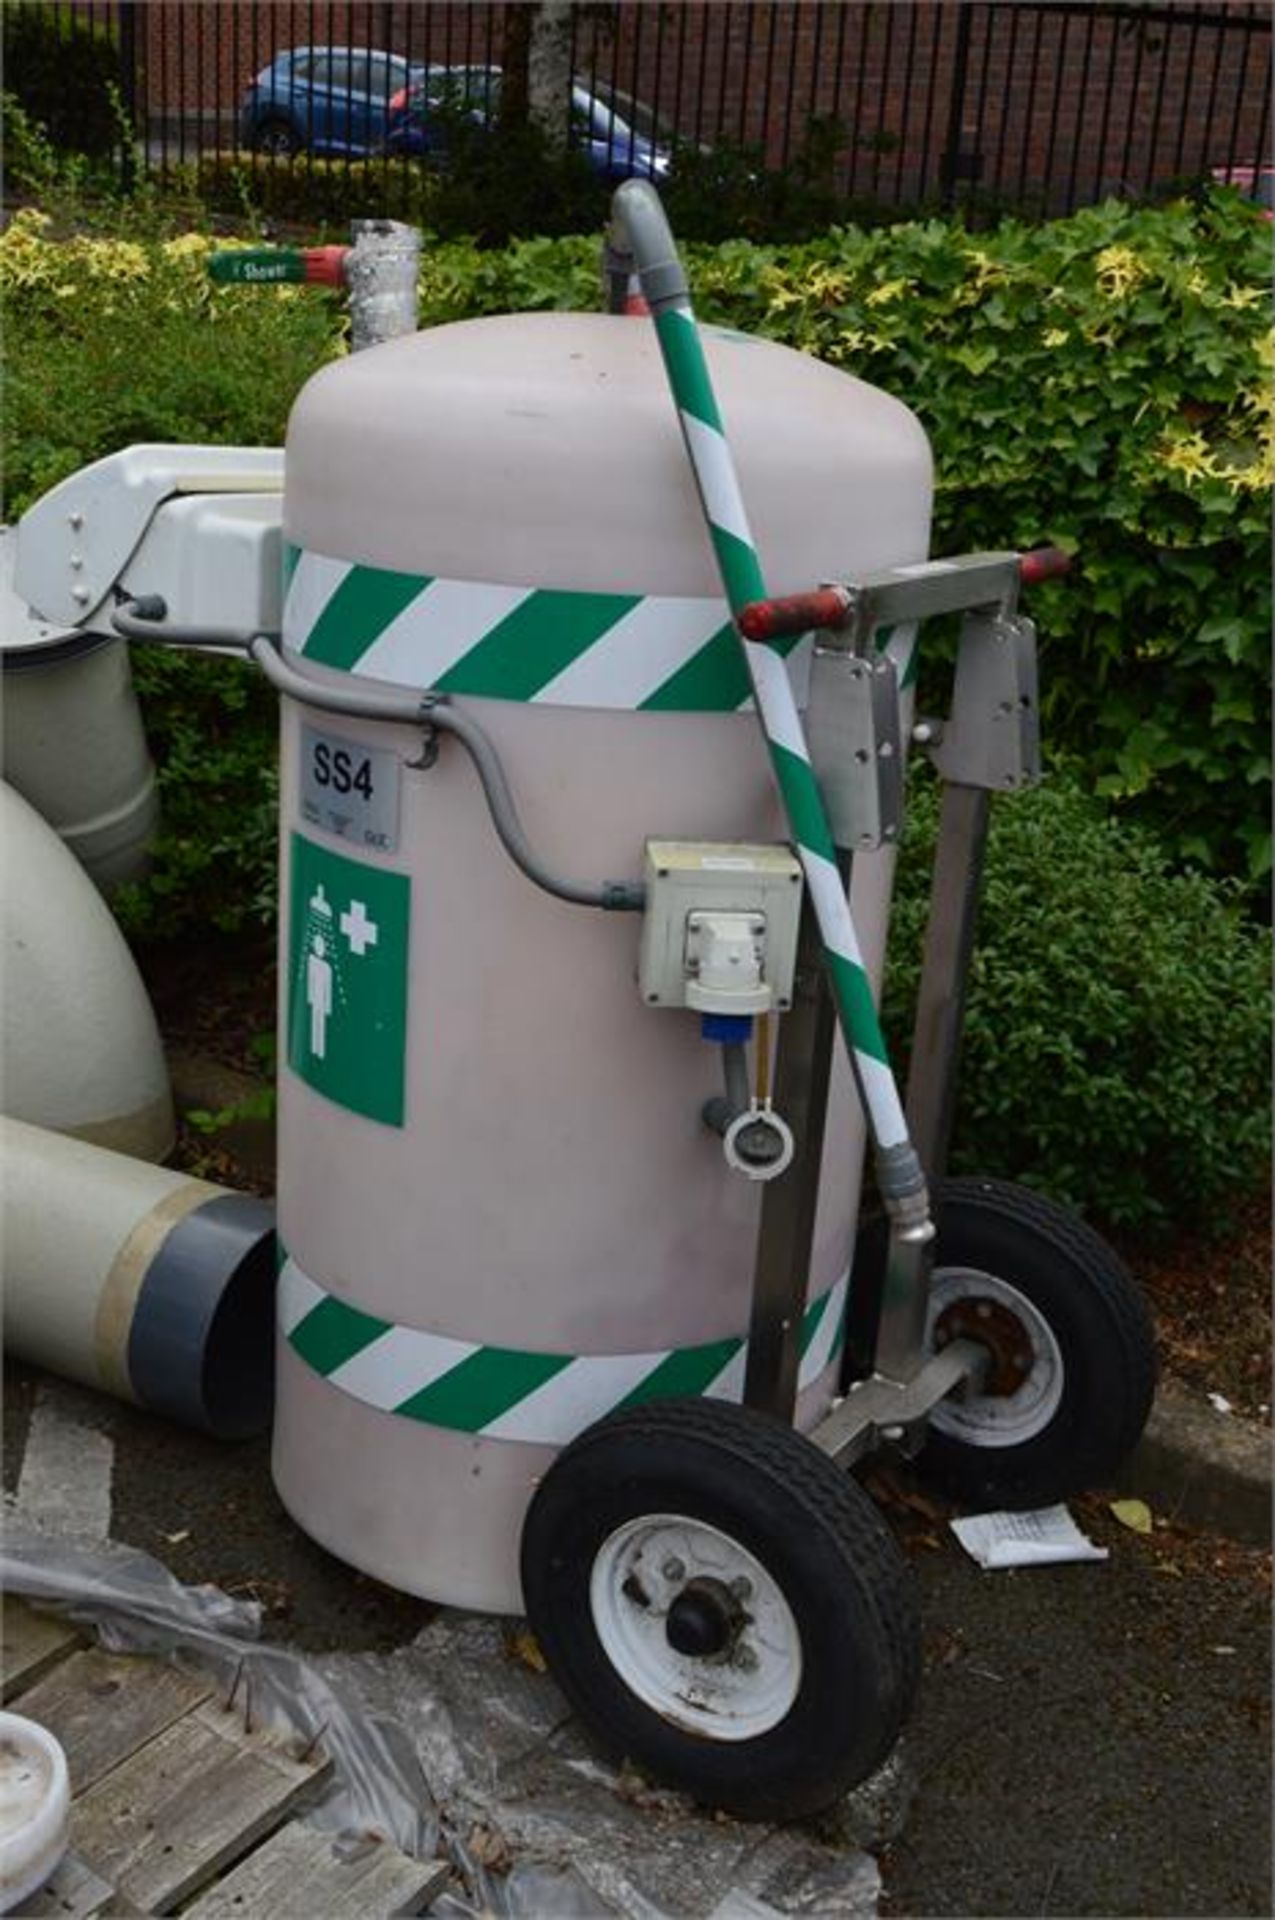 2 x Emergency Shower Company, mobile emergency shower, Item No. E905730/03 comprising trolley;